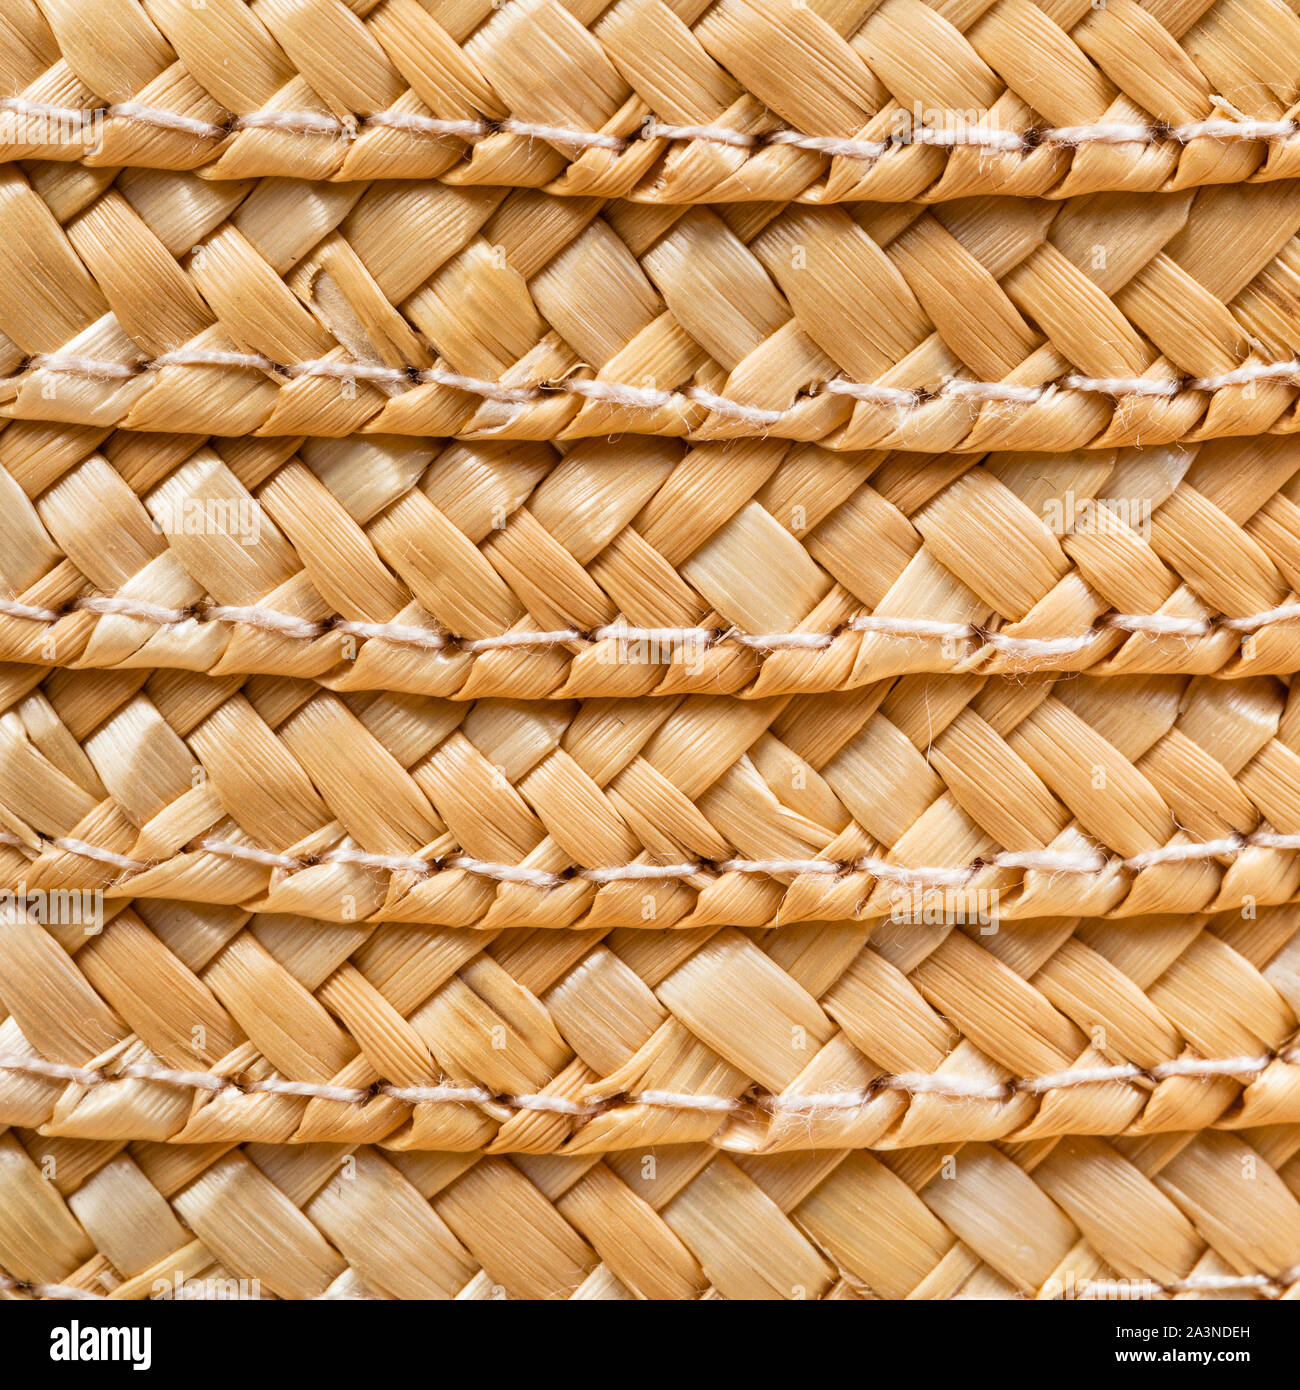 textile square background - texture of stitched summer straw hat from interwoven raffia fibers close up Stock Photo